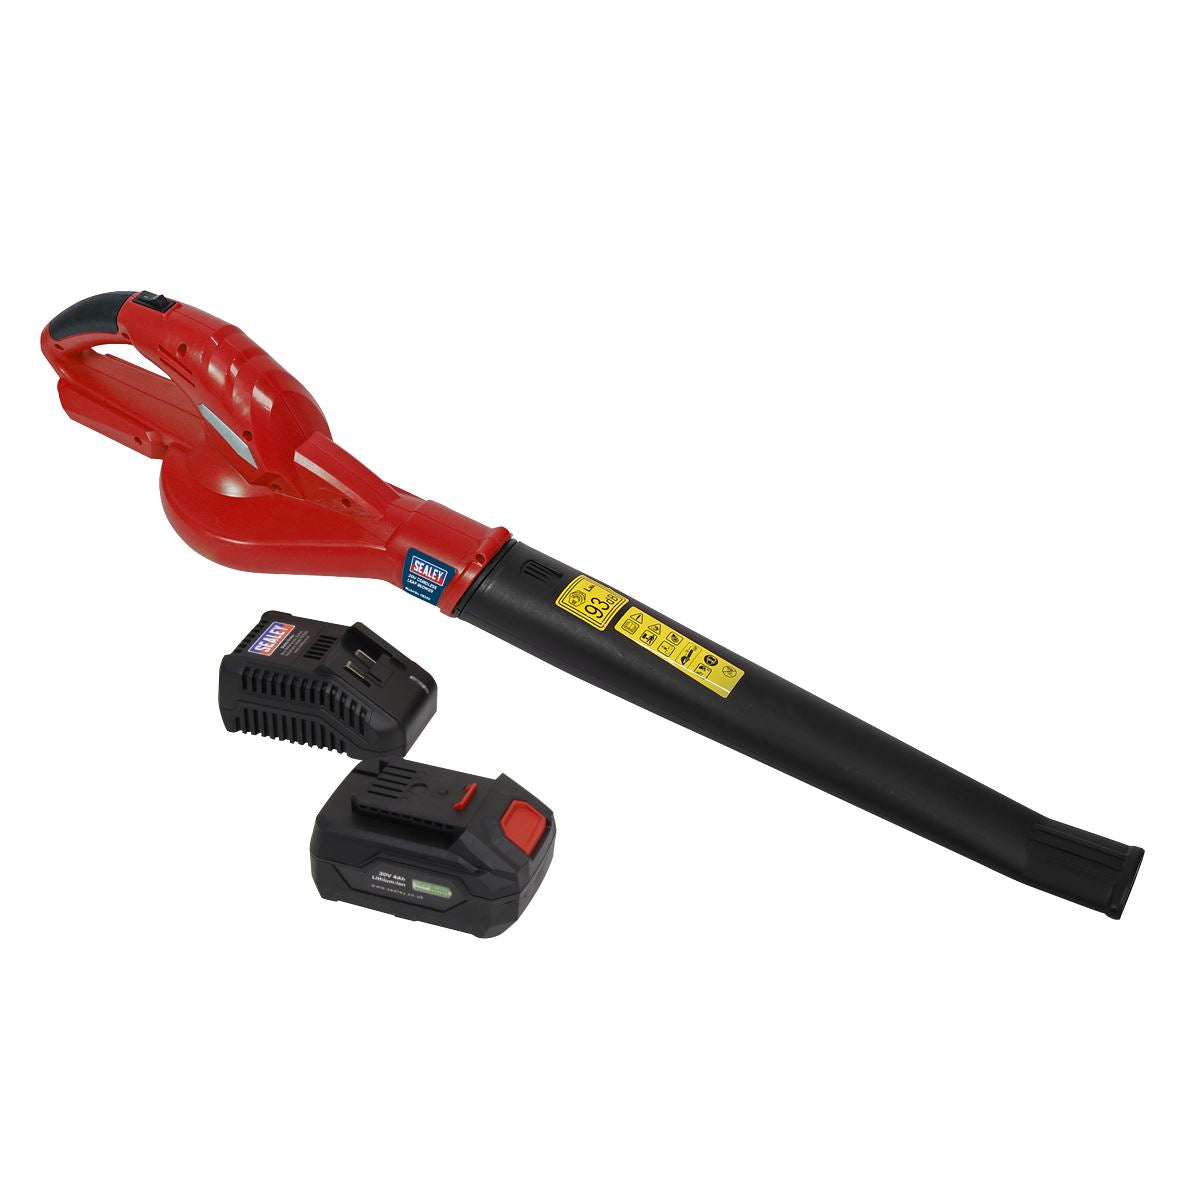 Sealey 20V Cordless Leaf Blower Kit 4Ah Battery and Charger